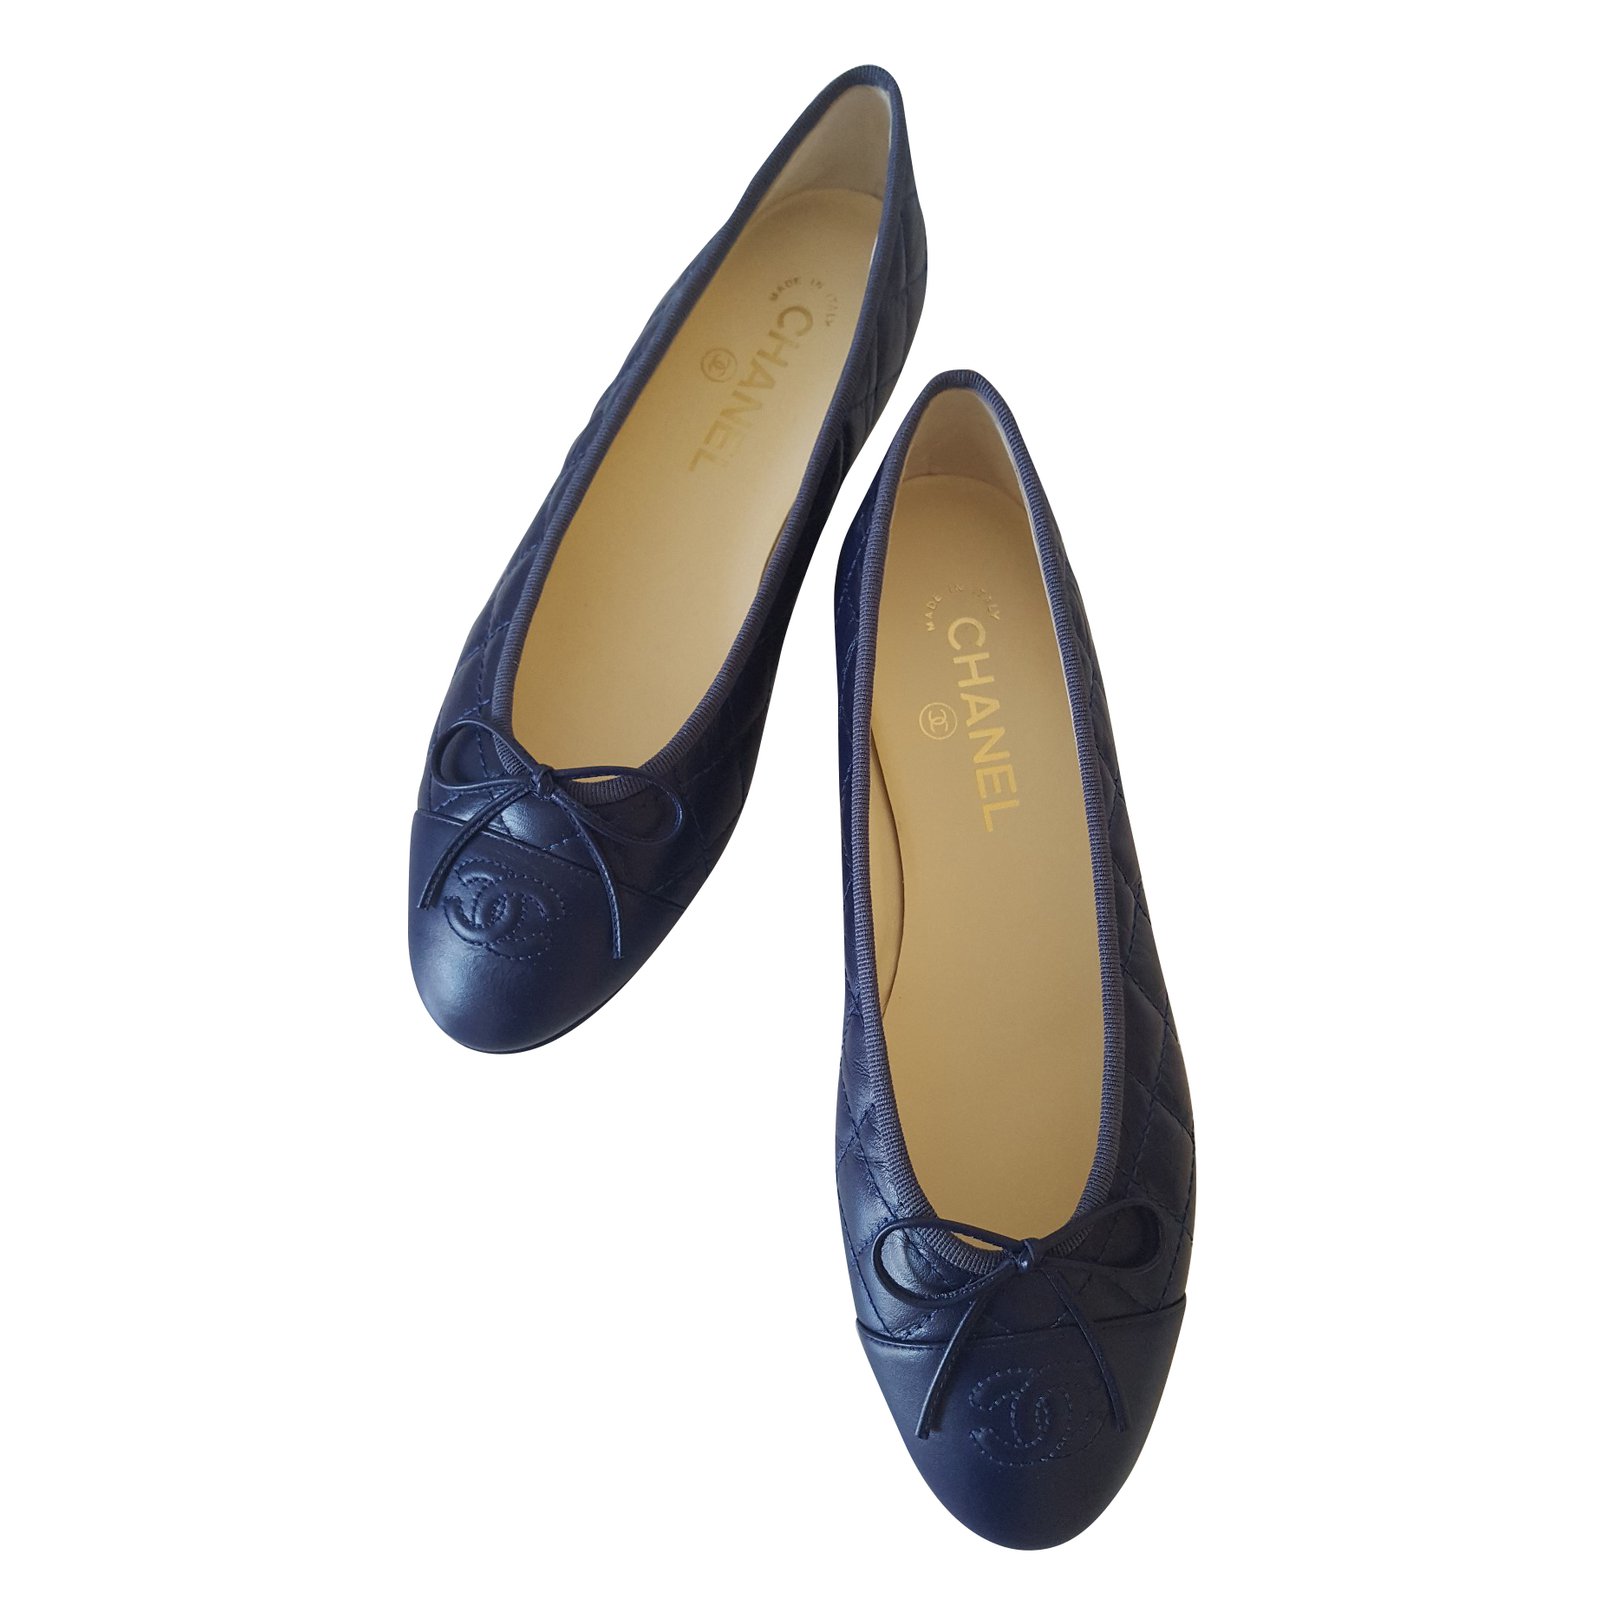 Chanel Ballet Flats, Blue Denim with Black, Size 38.5, New in Box GA001